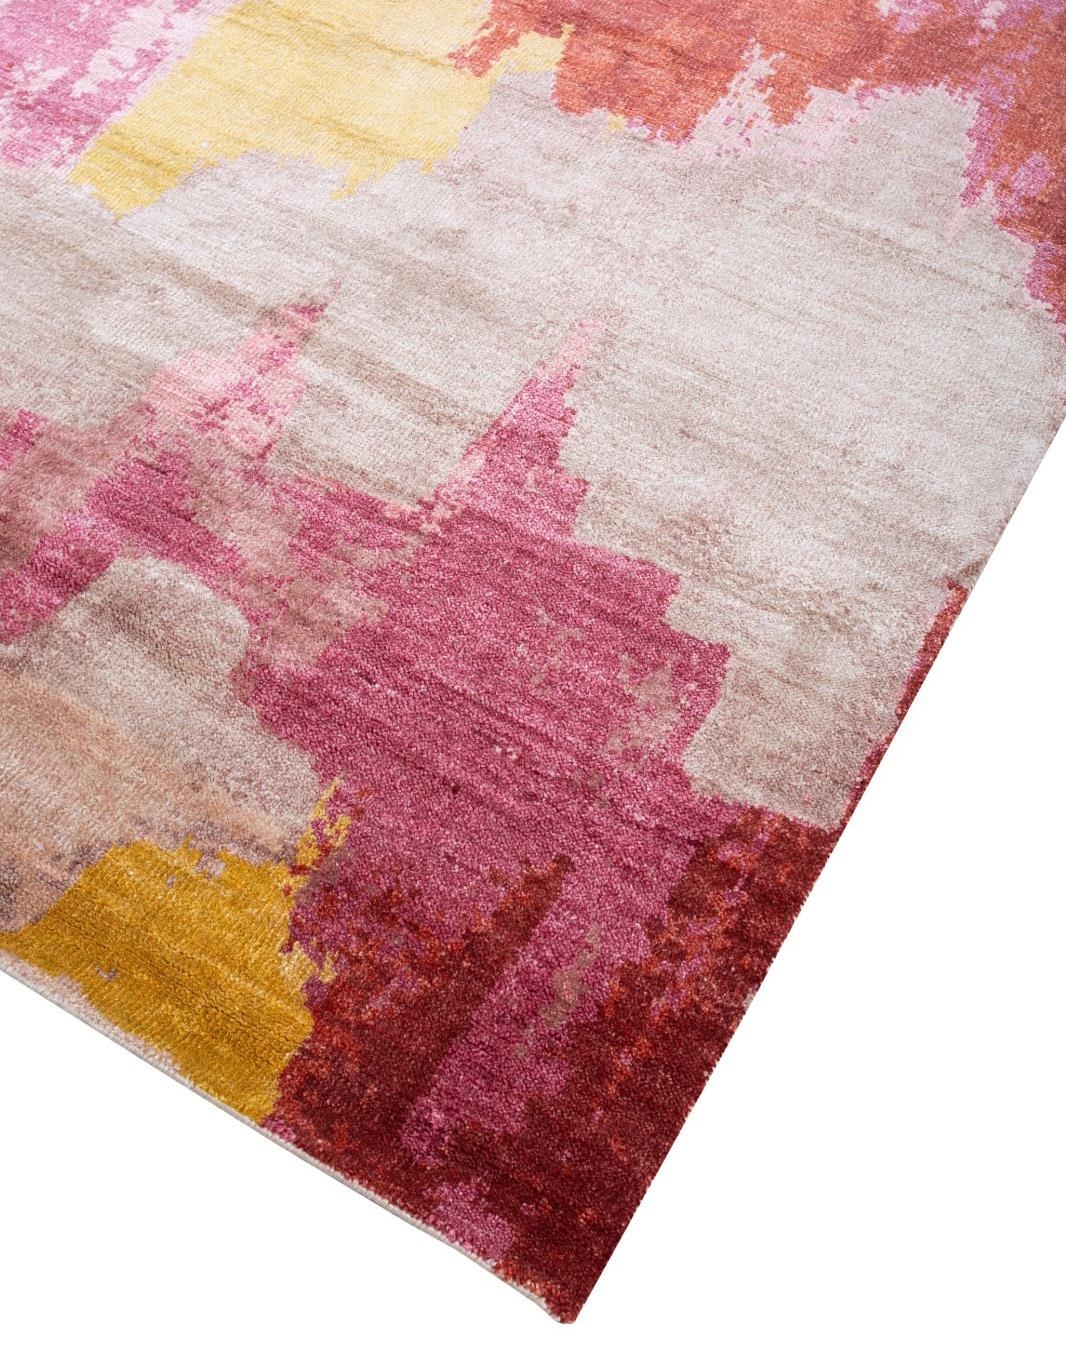 CONTEMPORARY BAMBOO SILK AND WOOL RUG, 244cm x 152cm. - Image 2 of 3